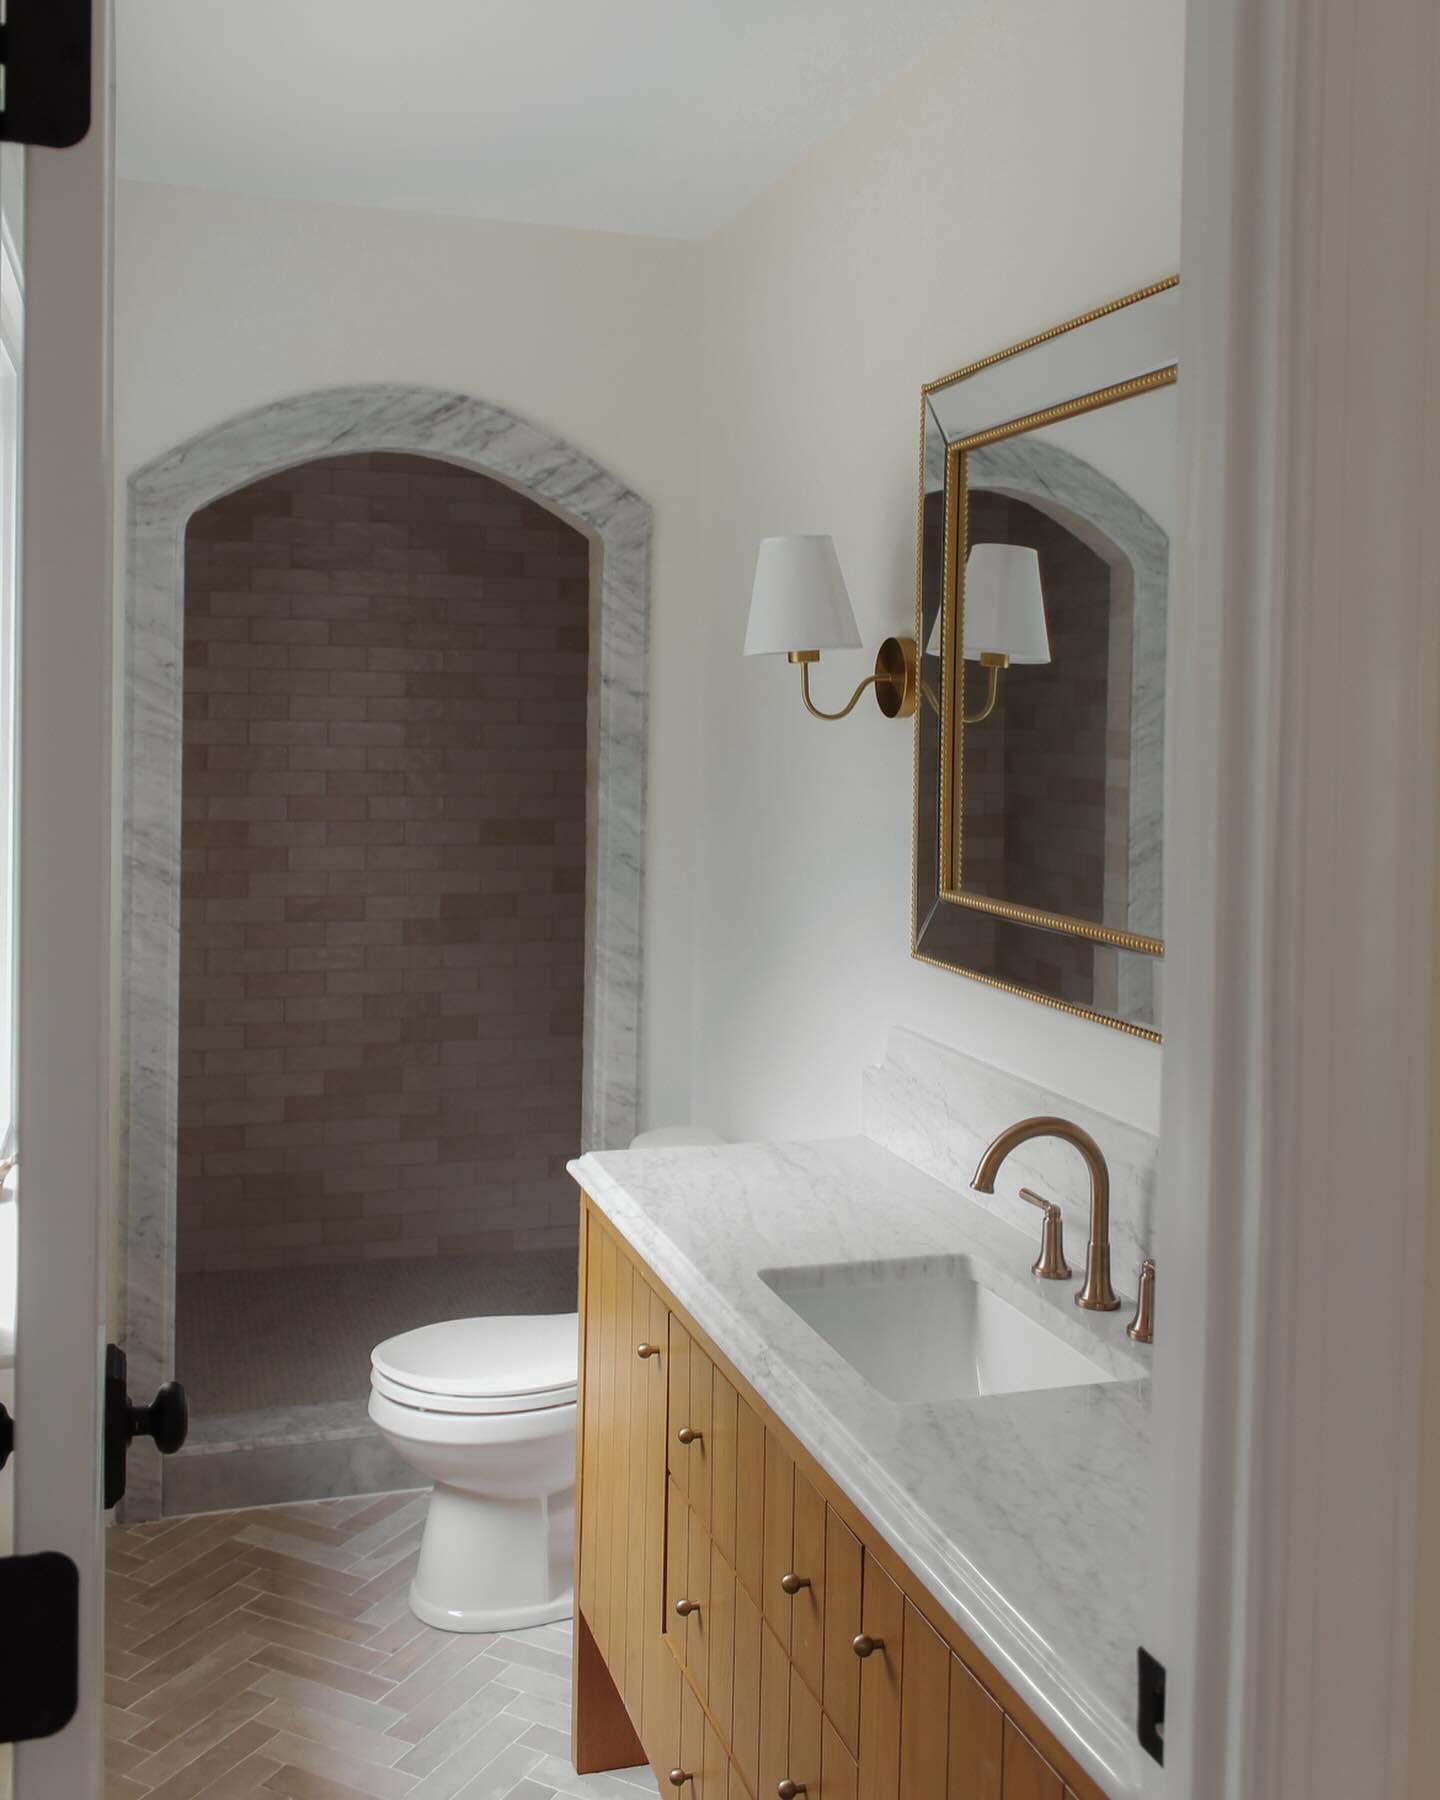 Narrow walls are a tough design obstacle when it comes to bathroom renovations. The hand selected finishes + hardware, detailed scalloped edges, cave shower, variation of shapes + patterns, functionality, and transition points make this space feel a 